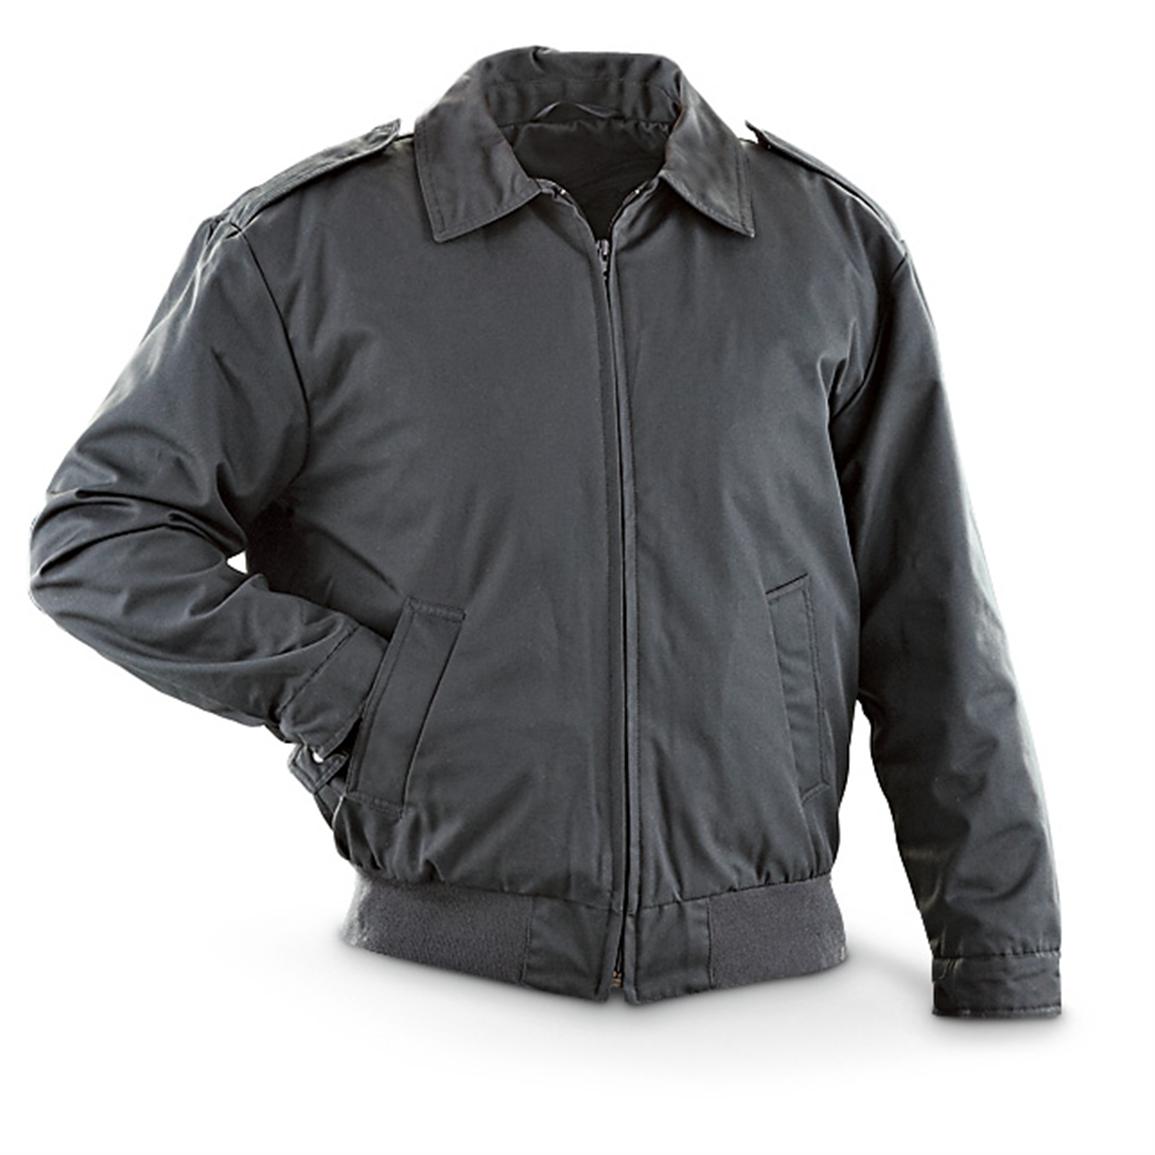 Military-style Jacket with Zip-out Liner, Black - 237389, Insulated ...